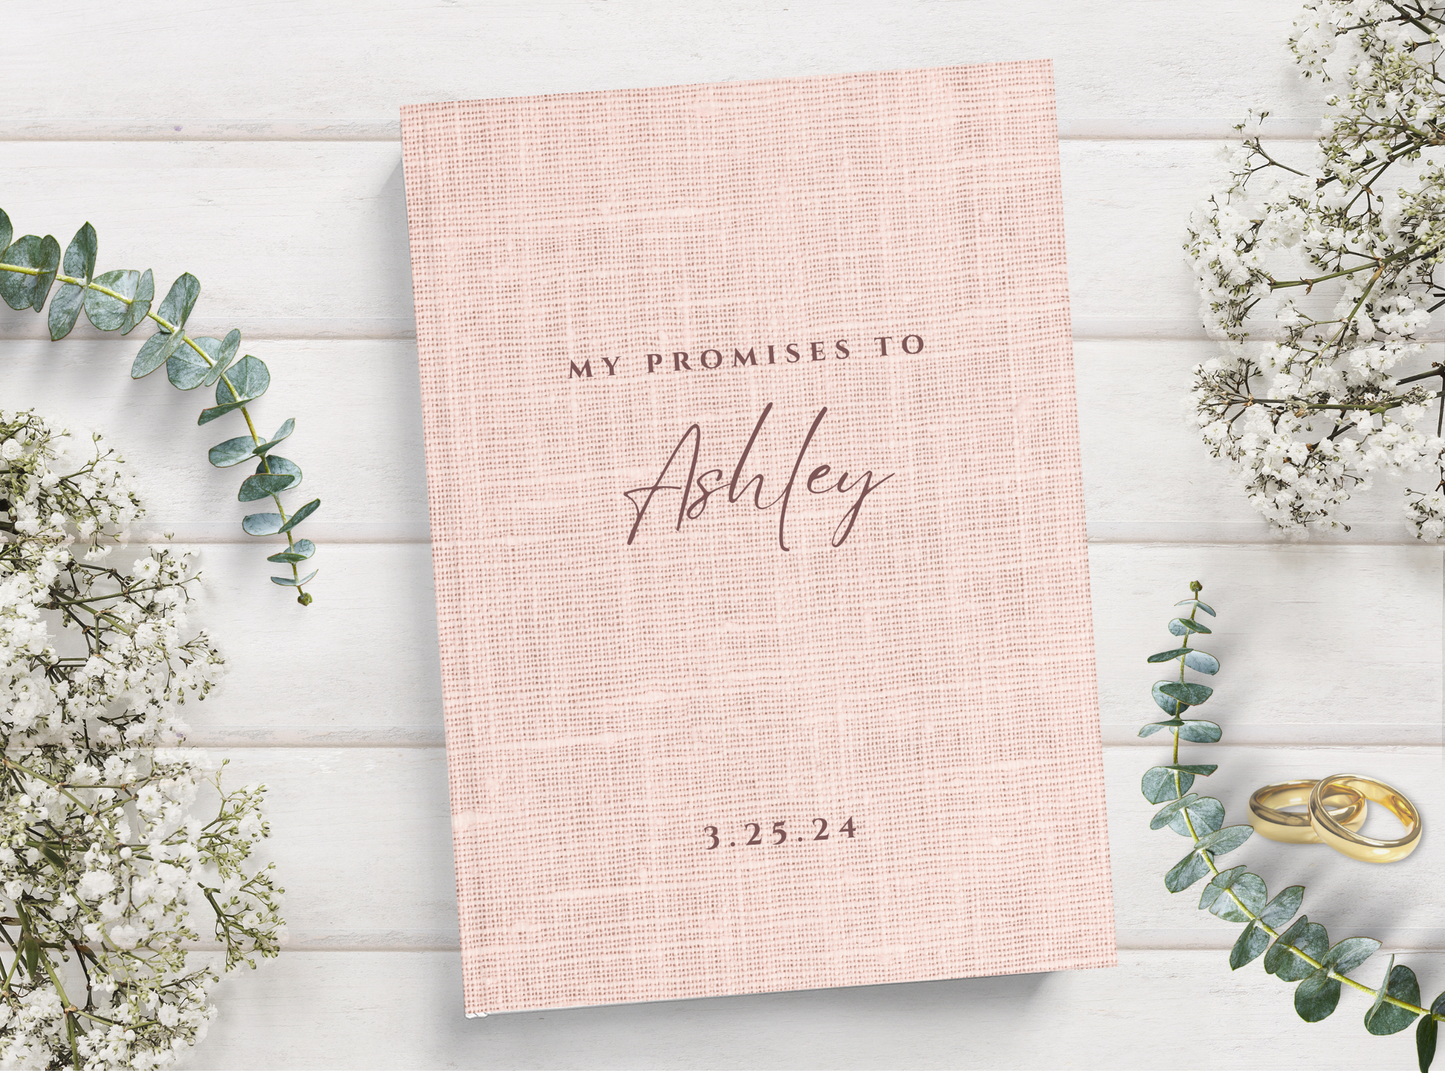 Wedding Vow Book of Promises Hard Cover Wedding Ceremony Vow Booklets, Speech Notes, Wedding Gift, Couple Engagement Gift, Bride Groom Gift